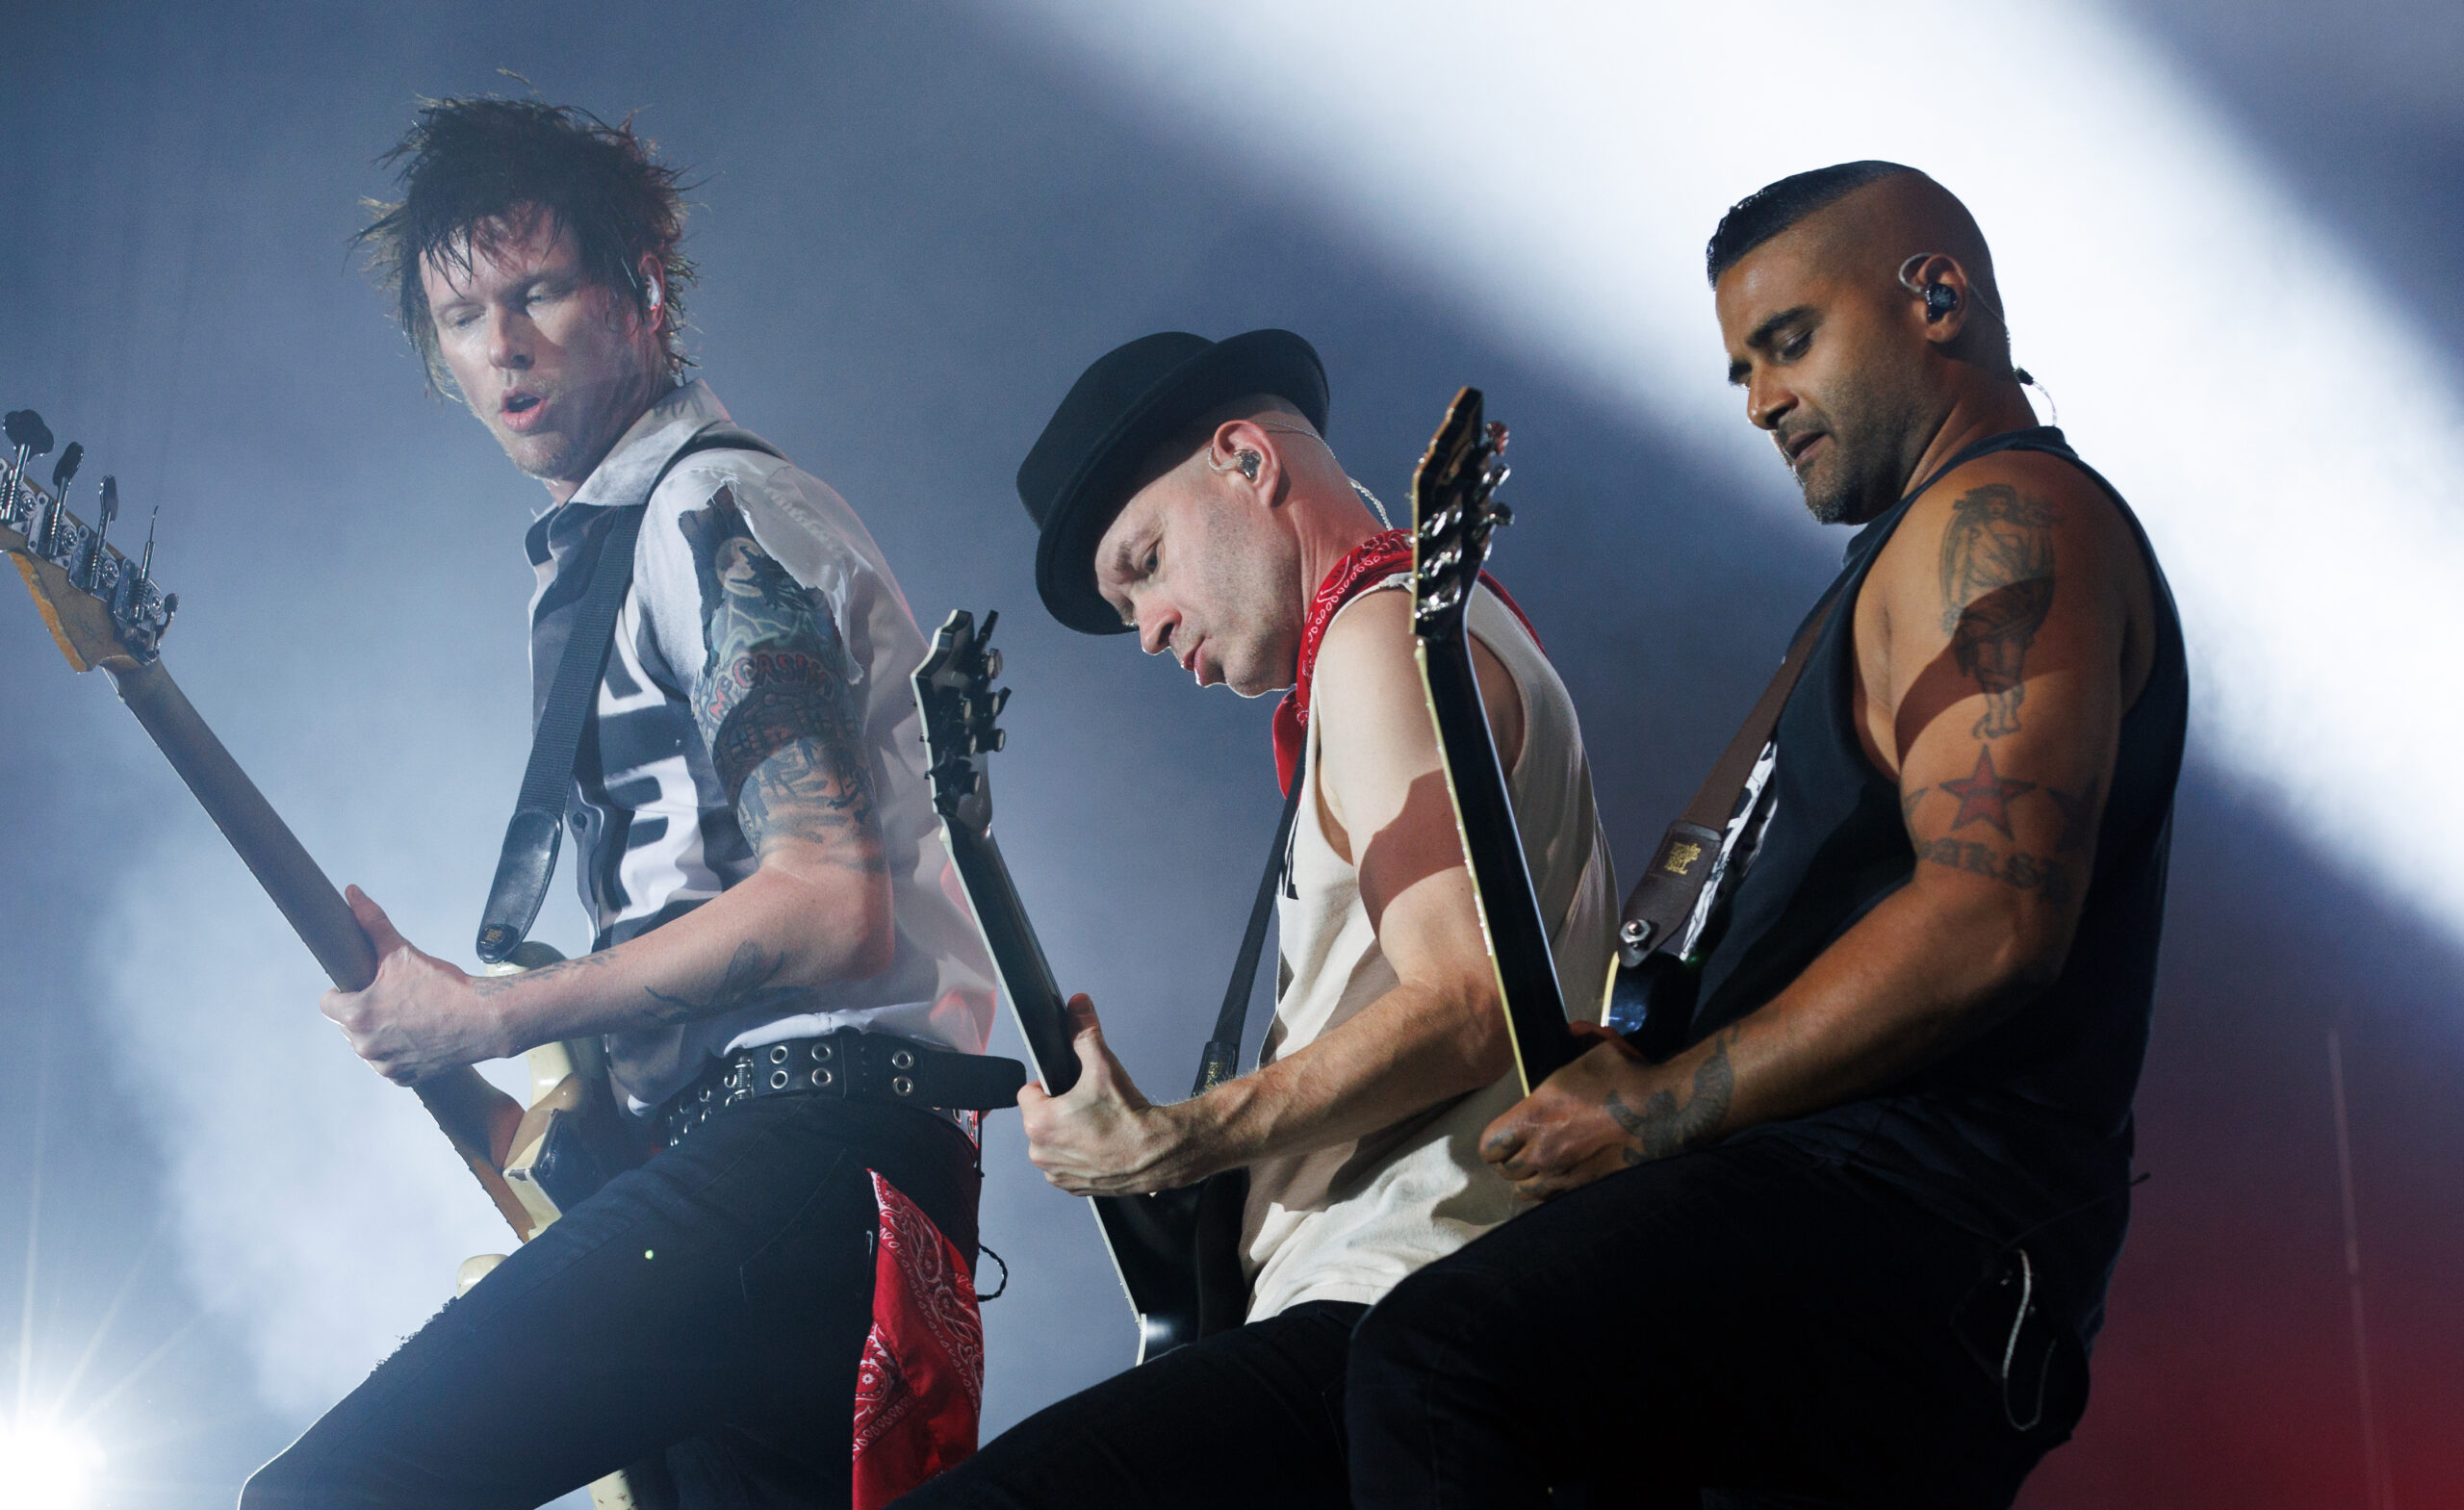 Sum 41, the pop-punk band, is breaking up after 27 years.